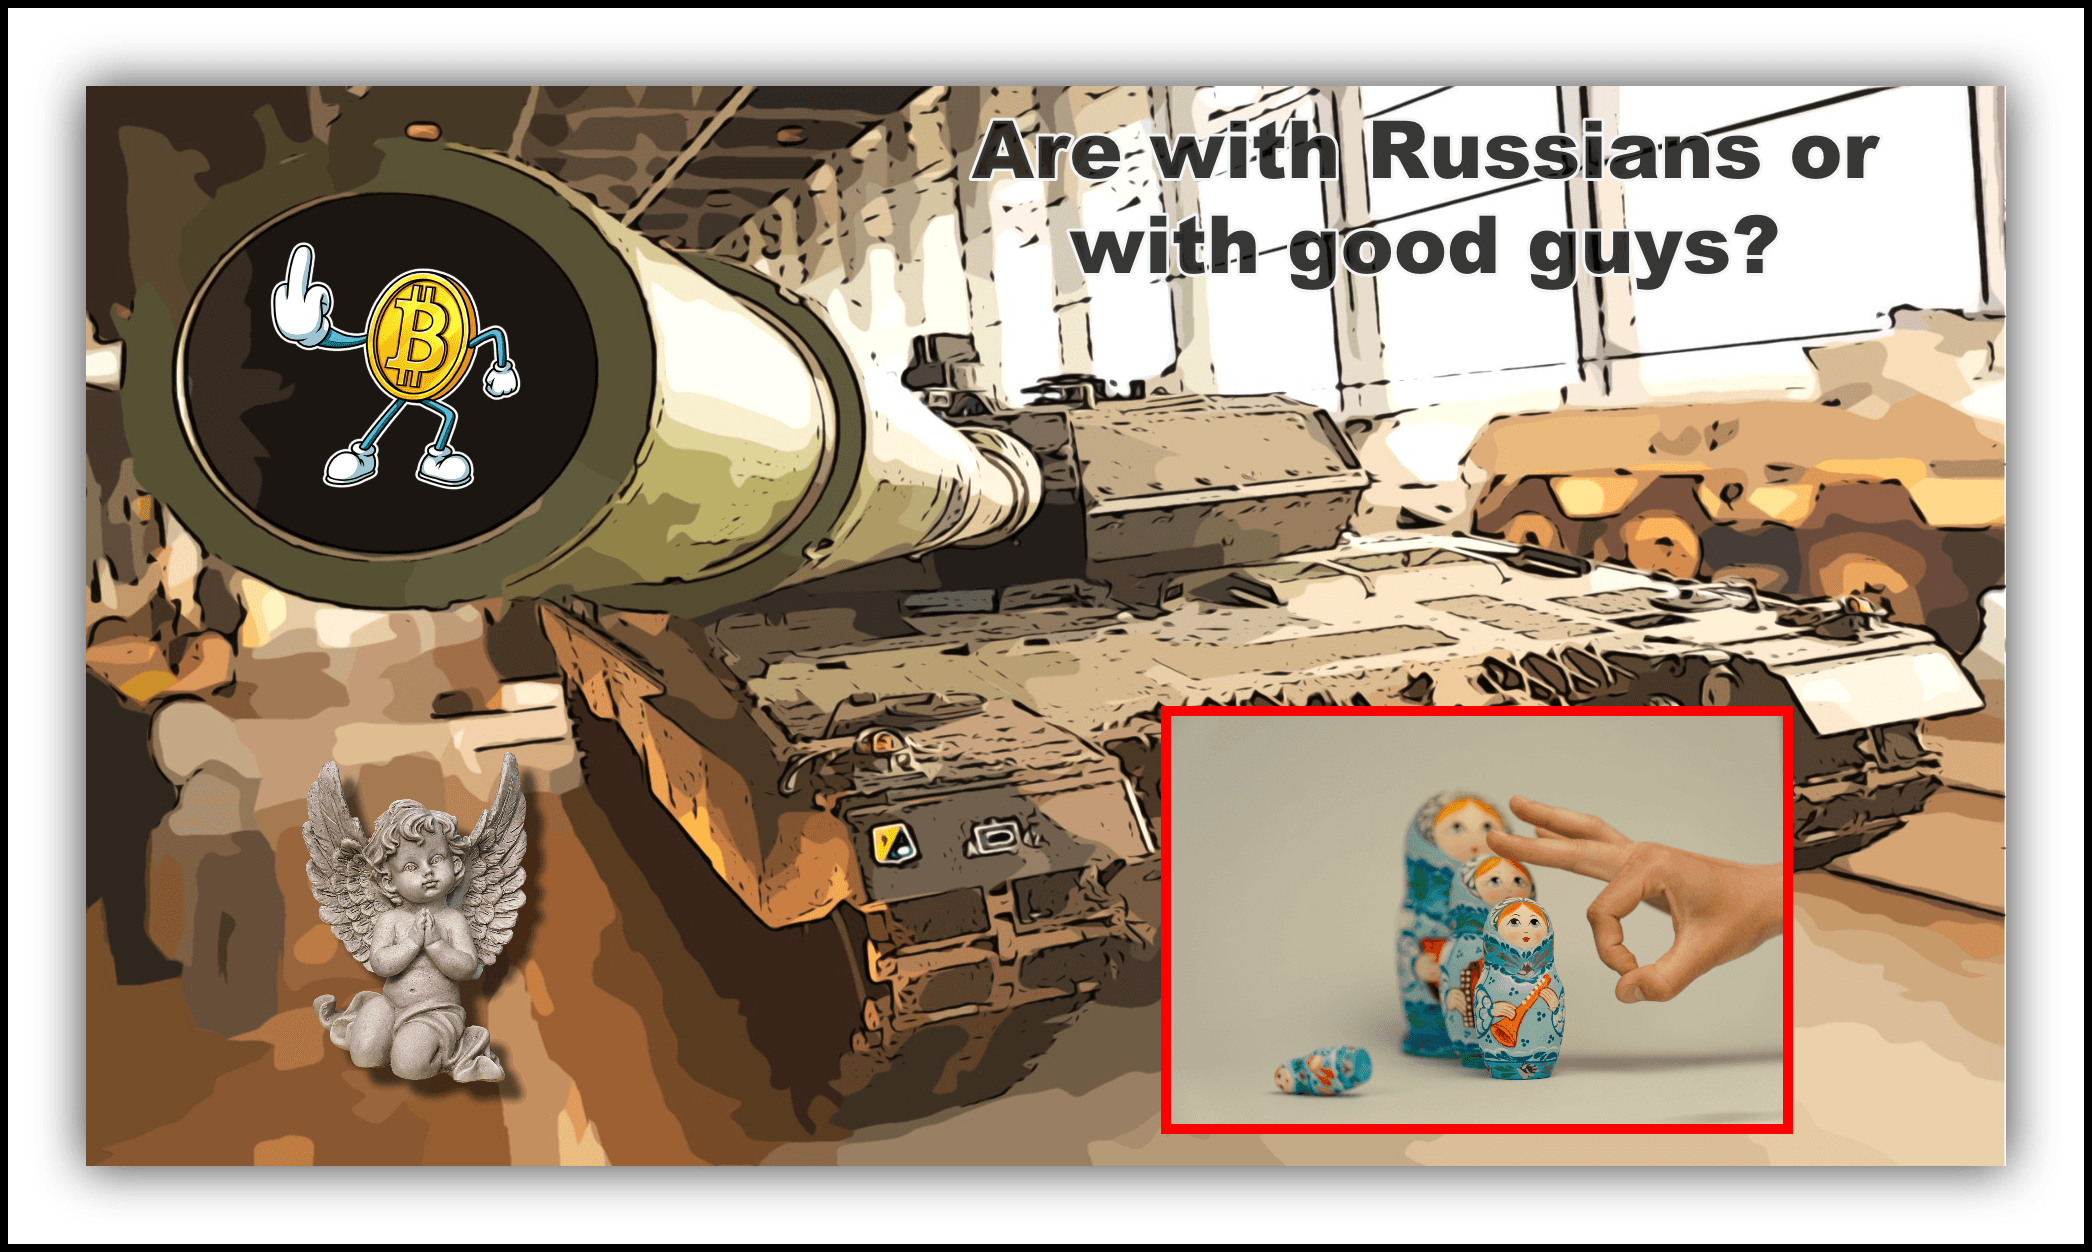 Are with Russians or good guys?